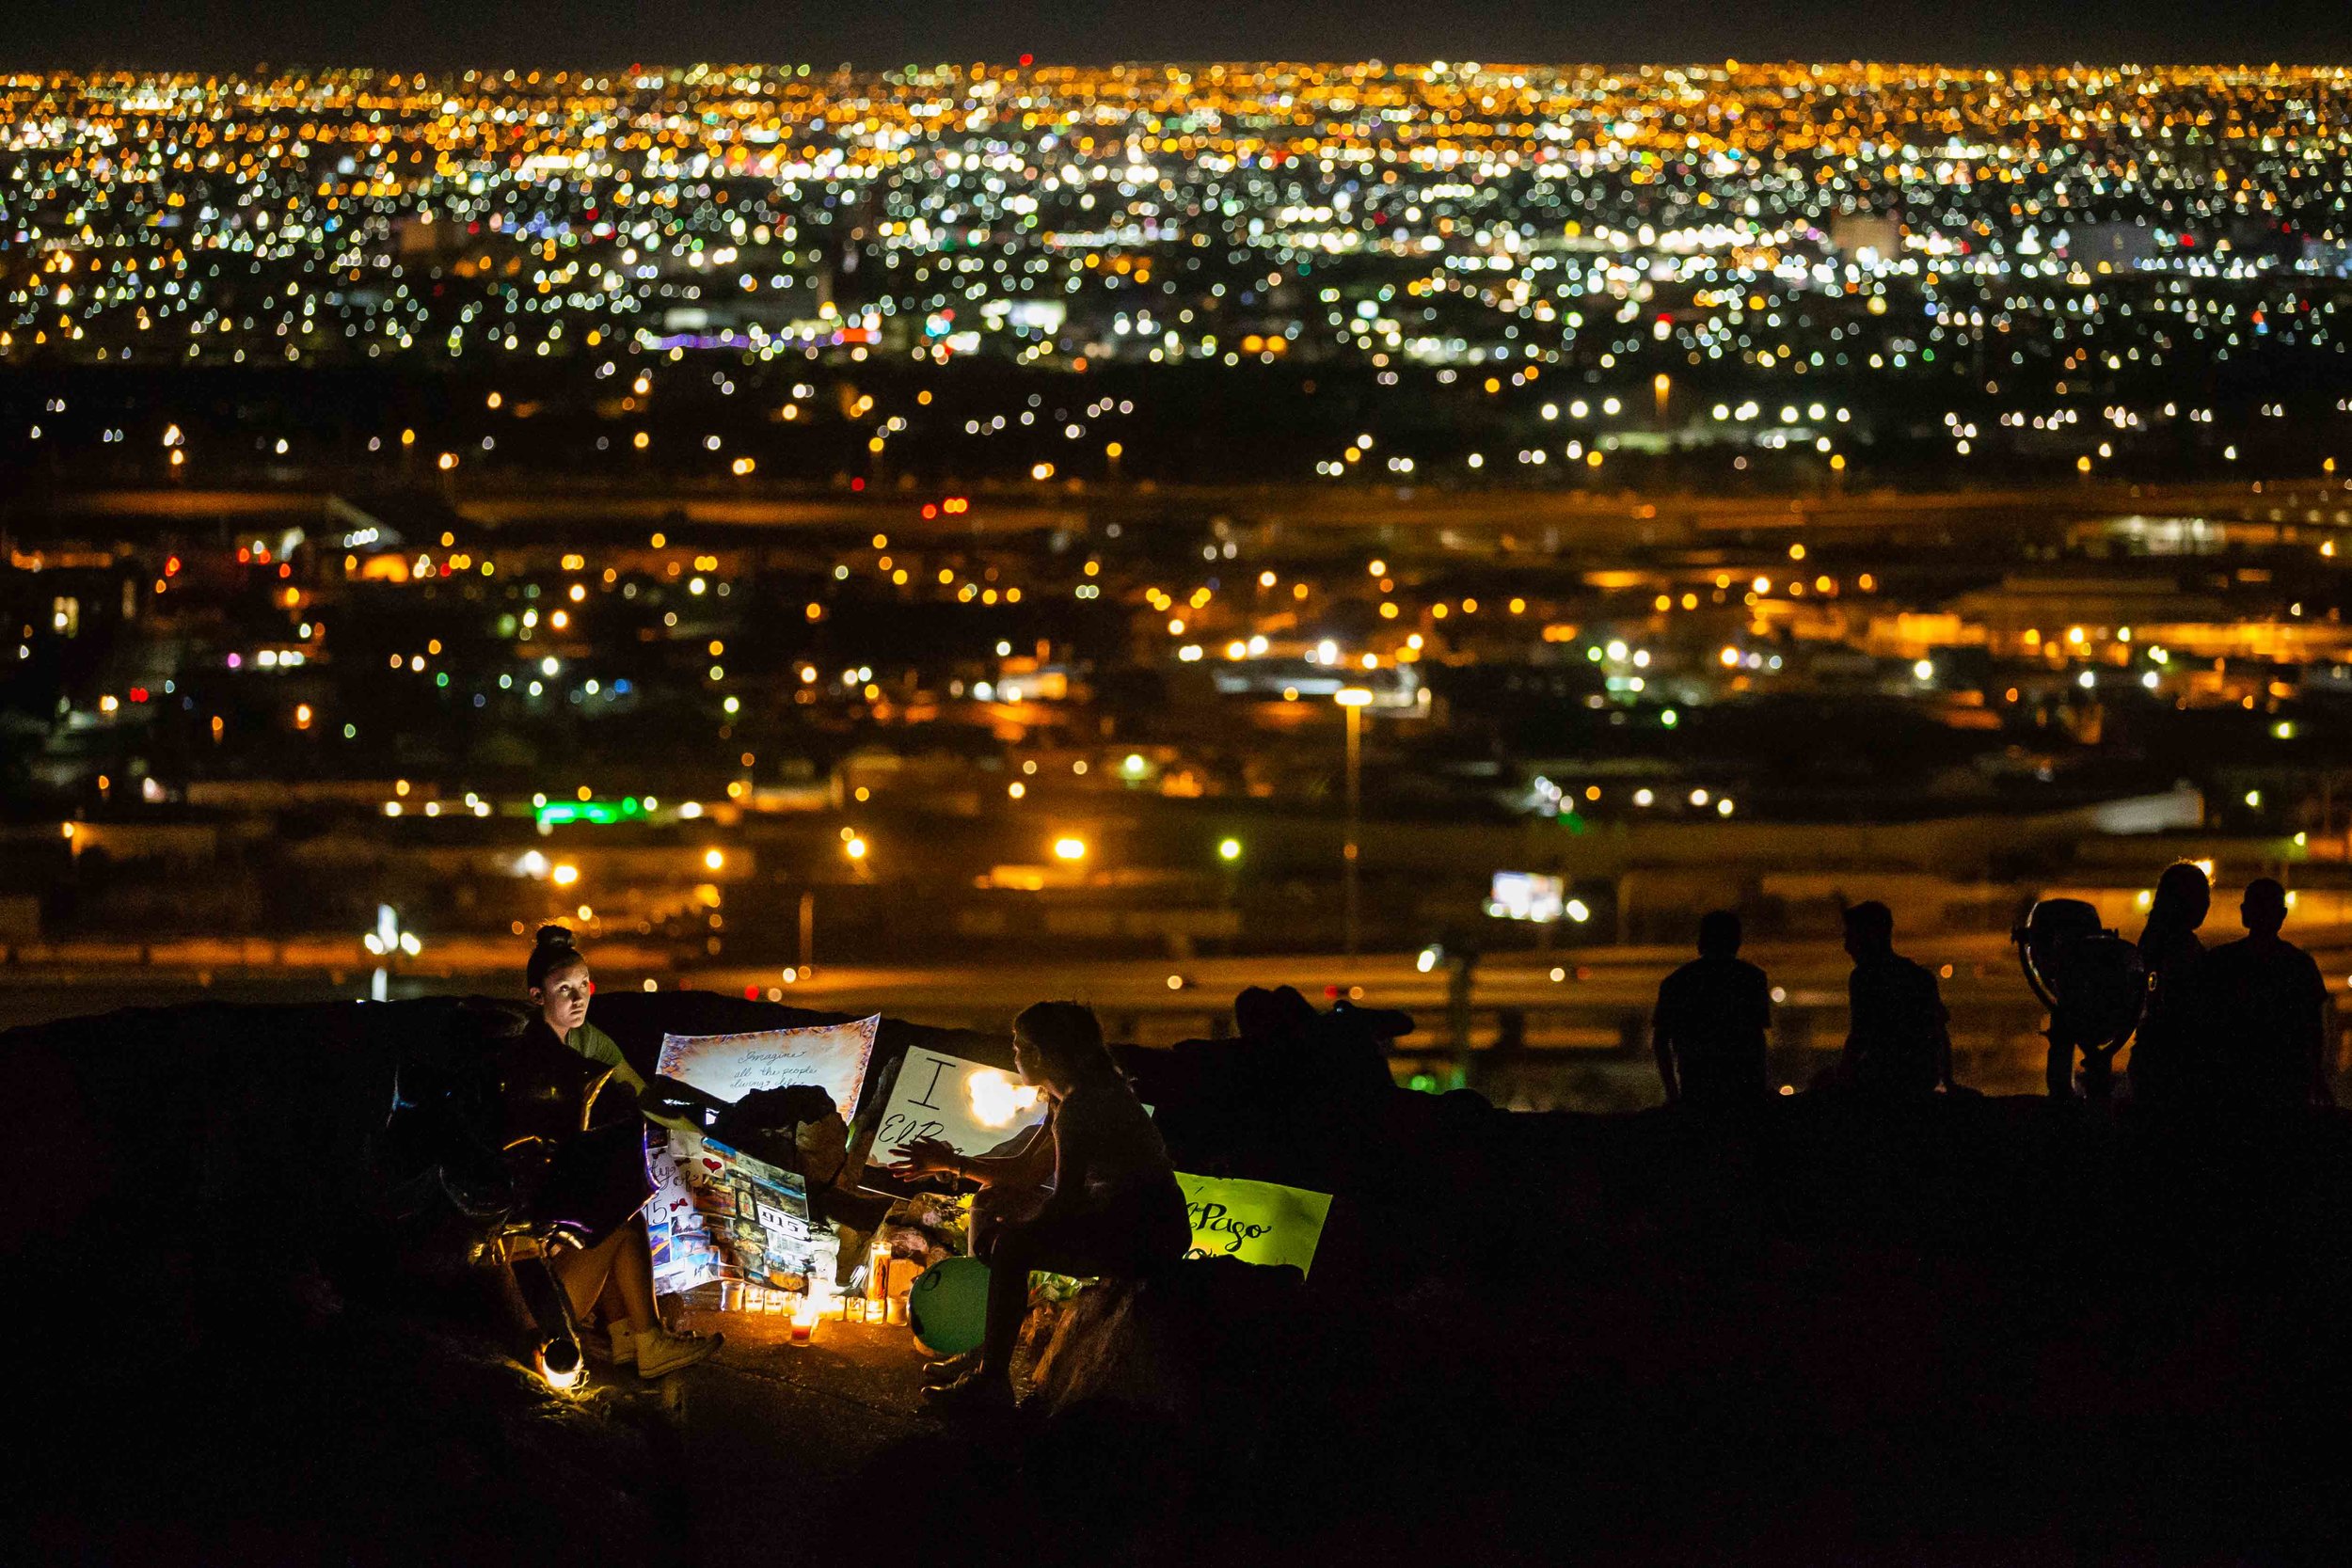  A group of students from Loretto Academy sit next to some posters and candles that were placed at the Scenic Drive - Overlook to honor the victims of the mass shooting occurred in Walmart last Saturday monirng in El Paso on Monday, August 5, 2019. 